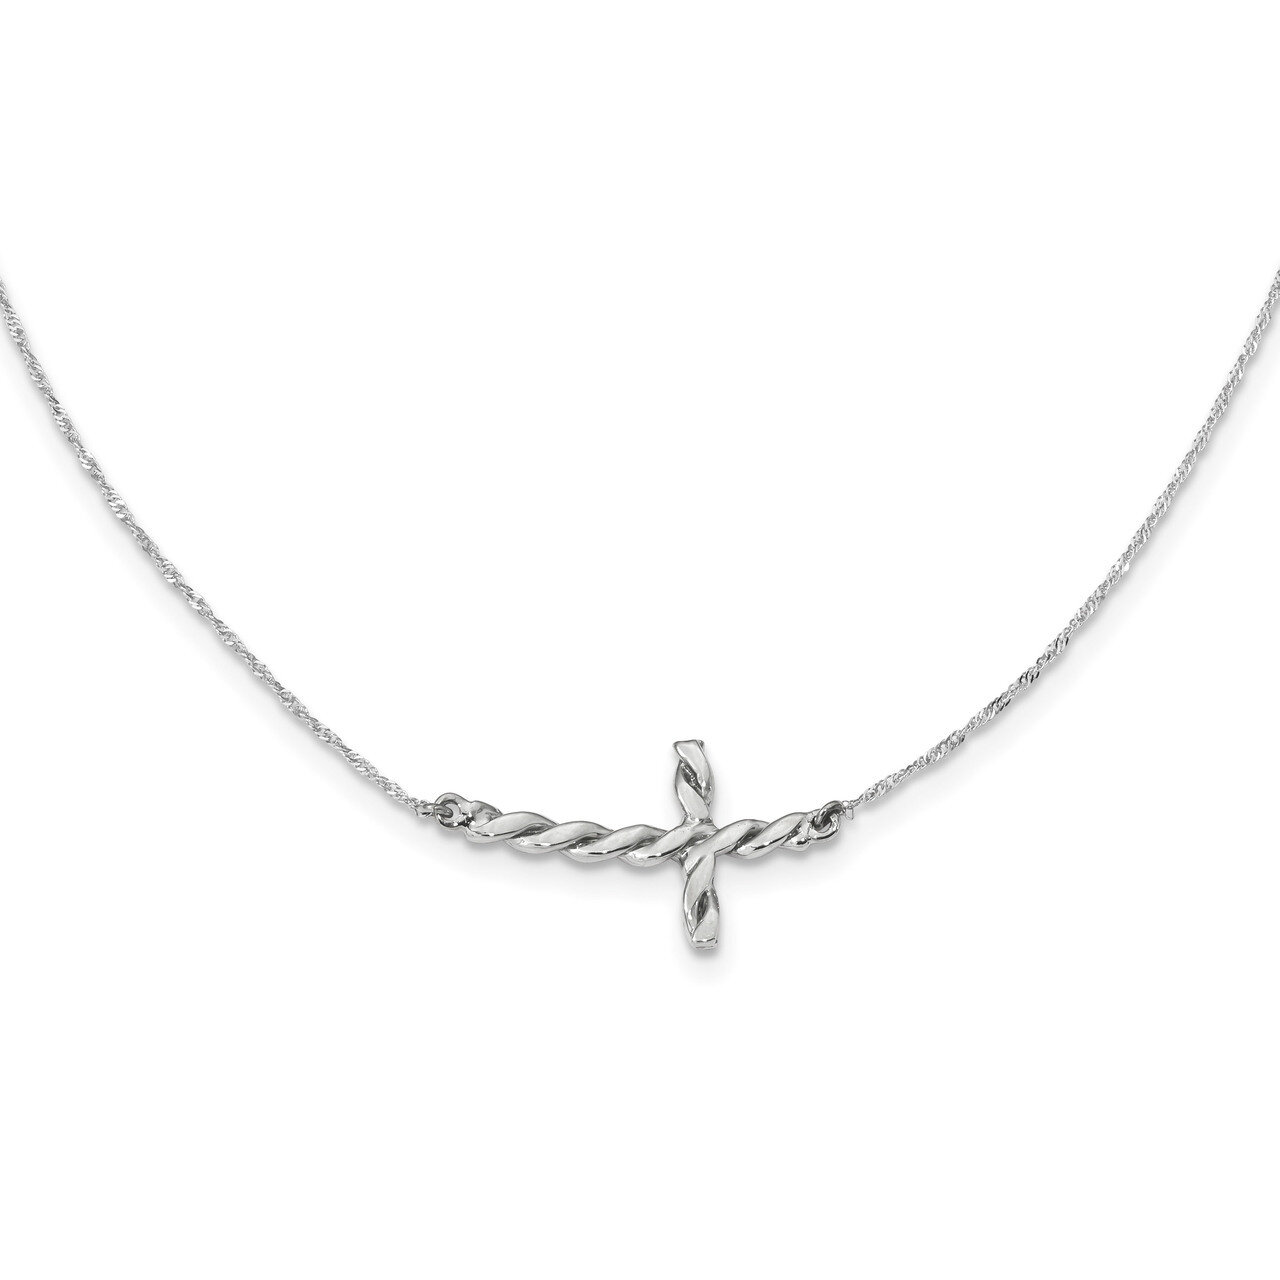 17 Inch Polished Twisted Sideways Cross 17 inch Necklace 14k white Gold SF2520-17